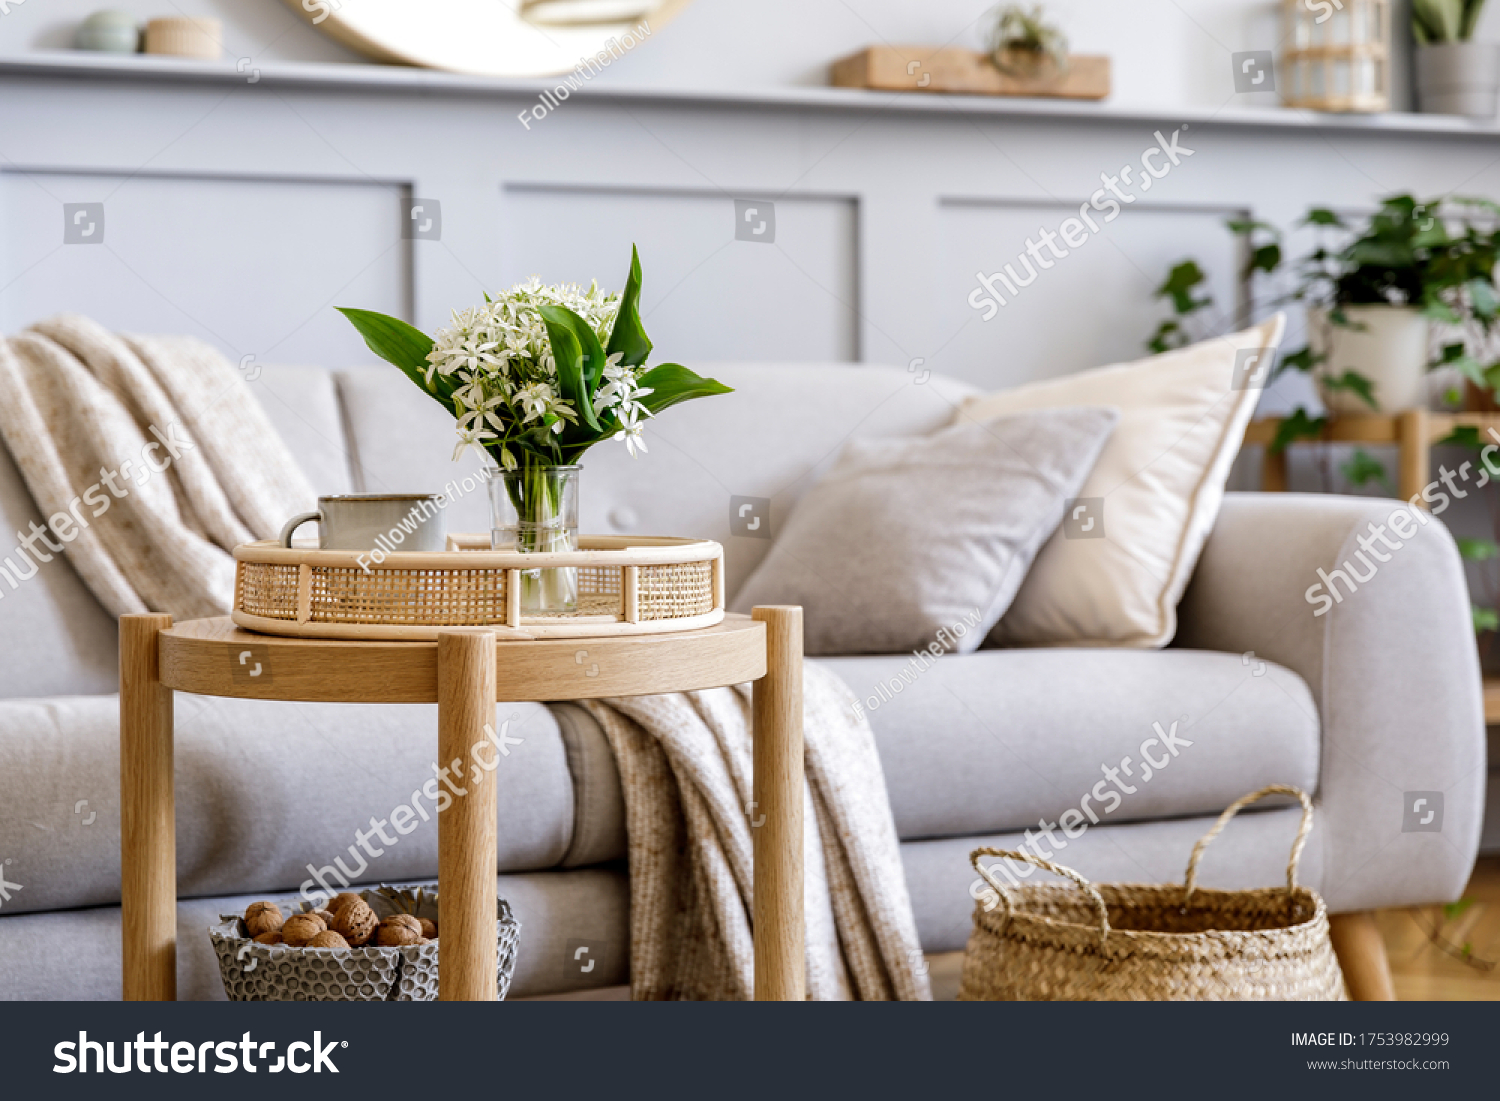 Scandinavian living room interior with design grey sofa, wooden coffee table, plants, shelf, spring flowers in vase, decoration and elegant personal accessories at home decor. #1753982999